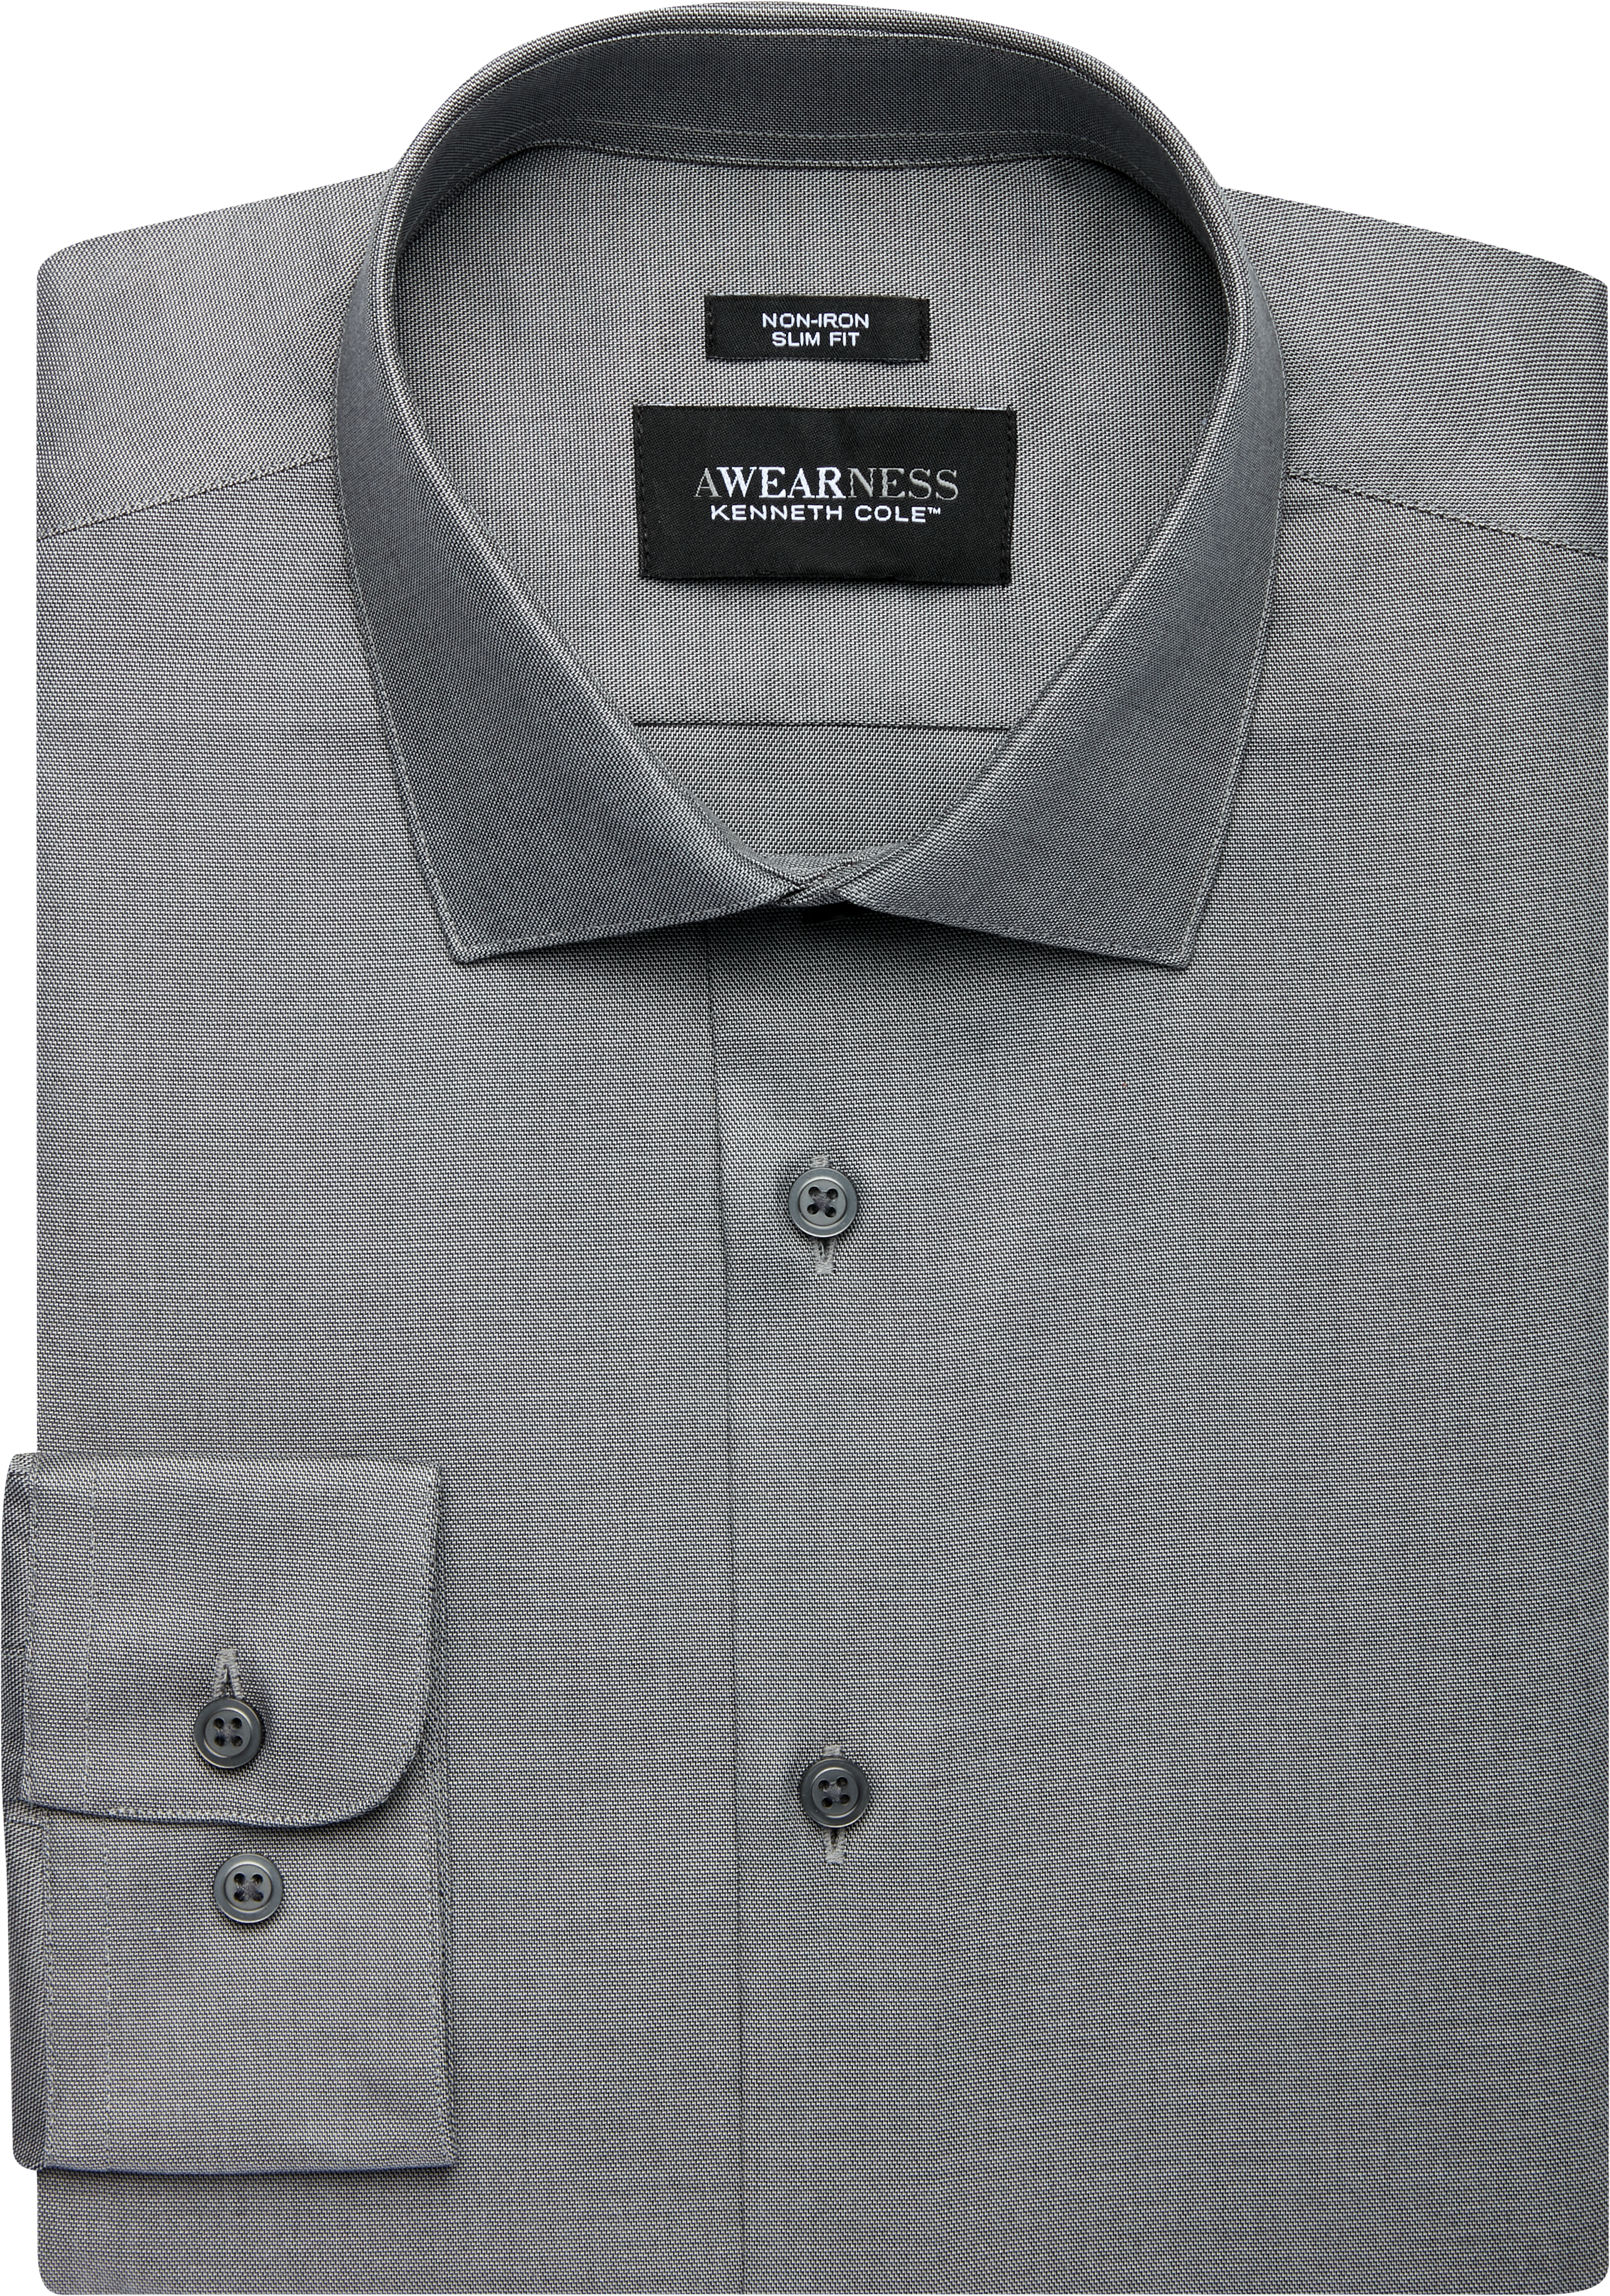 Awearness Kenneth Cole Charcoal Slim Fit Dress Shirt - Men's Featured ...